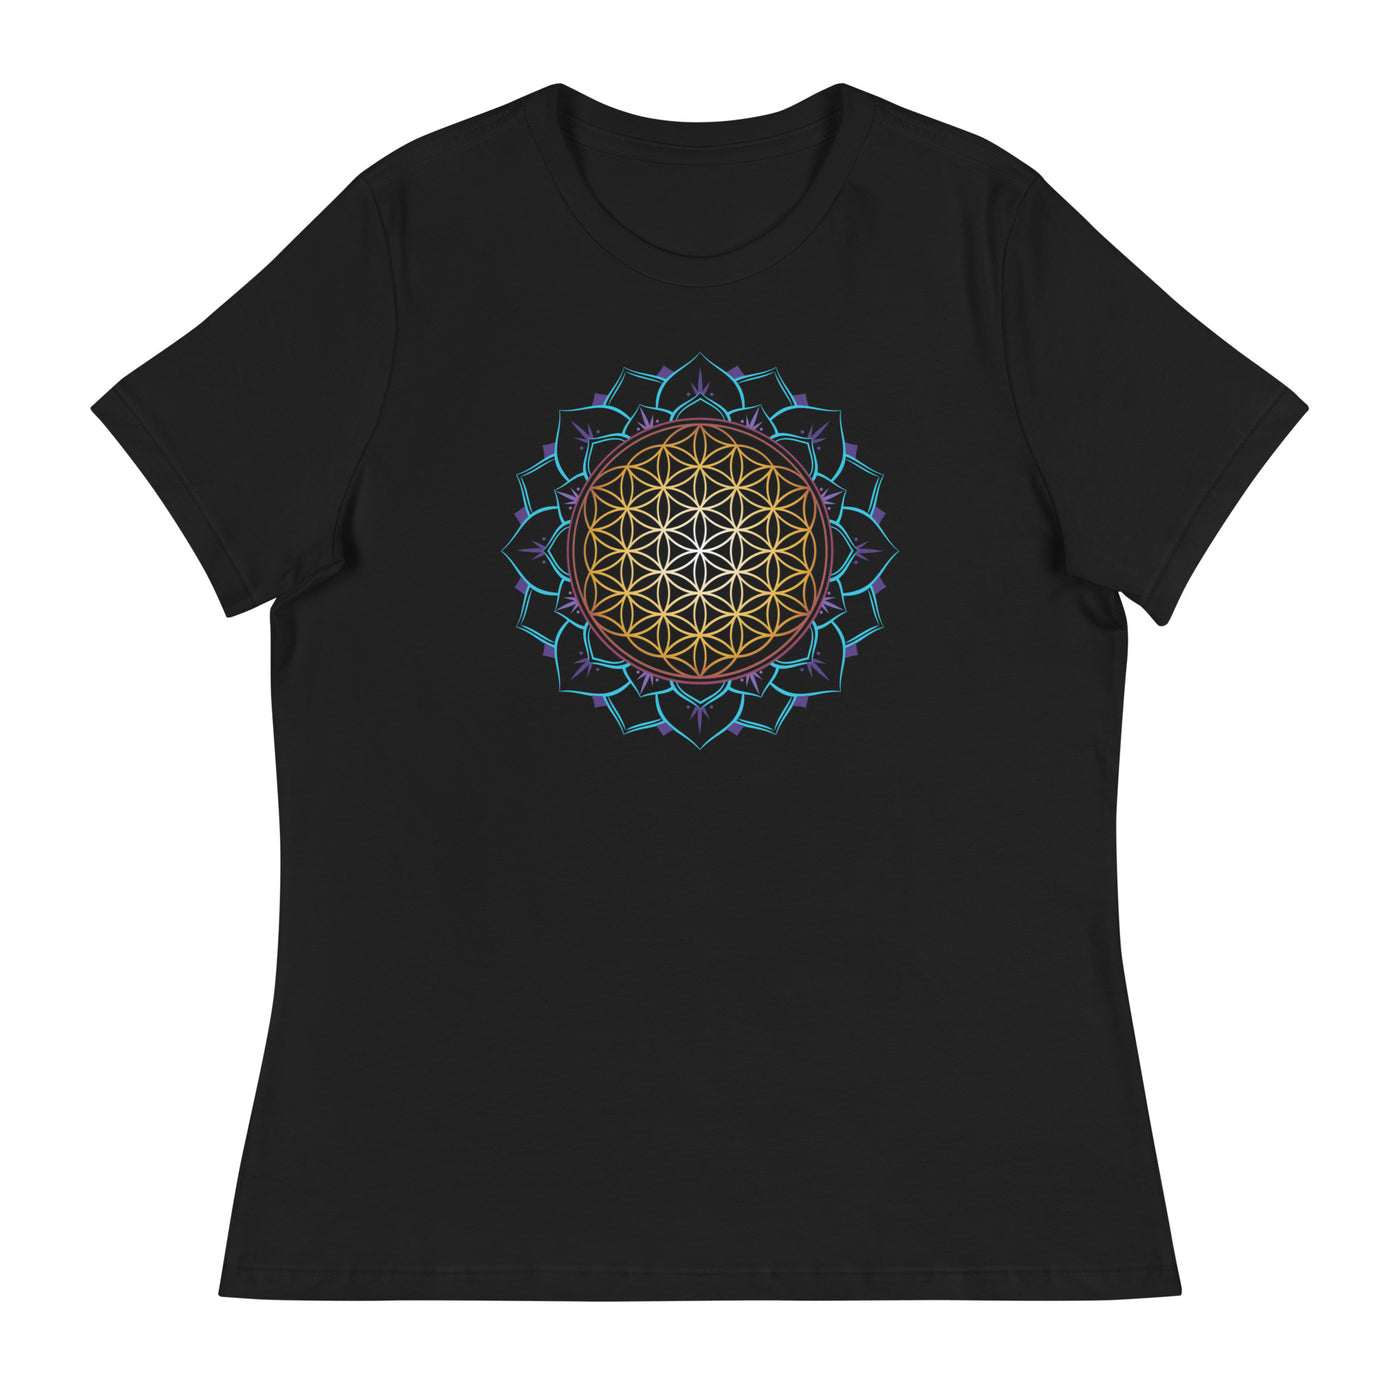 Flower of Life - Relaxed Fit T-Shirt